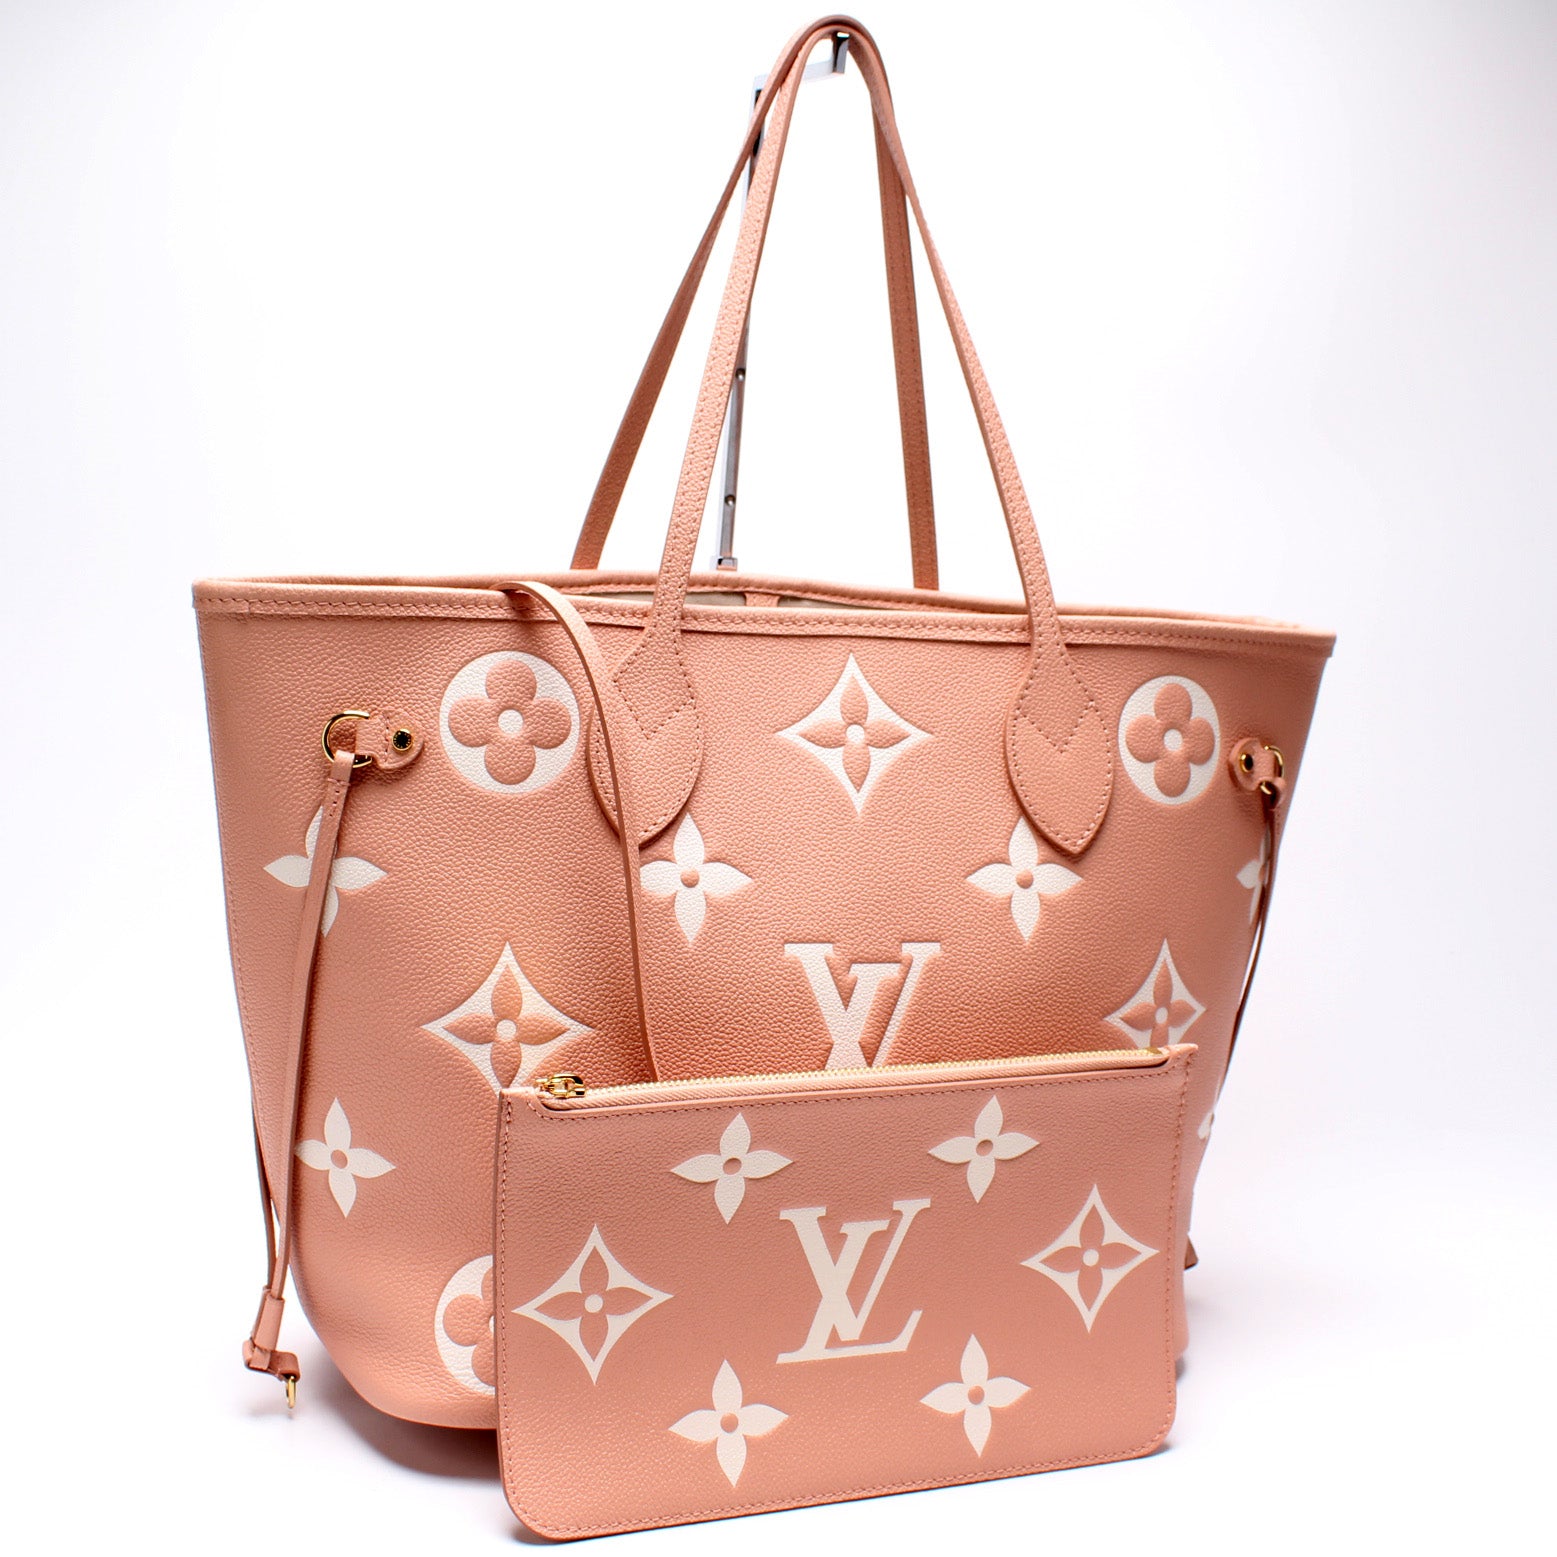 Authenticated Used Louis Vuitton Neverfull MM Tote Bag M45679